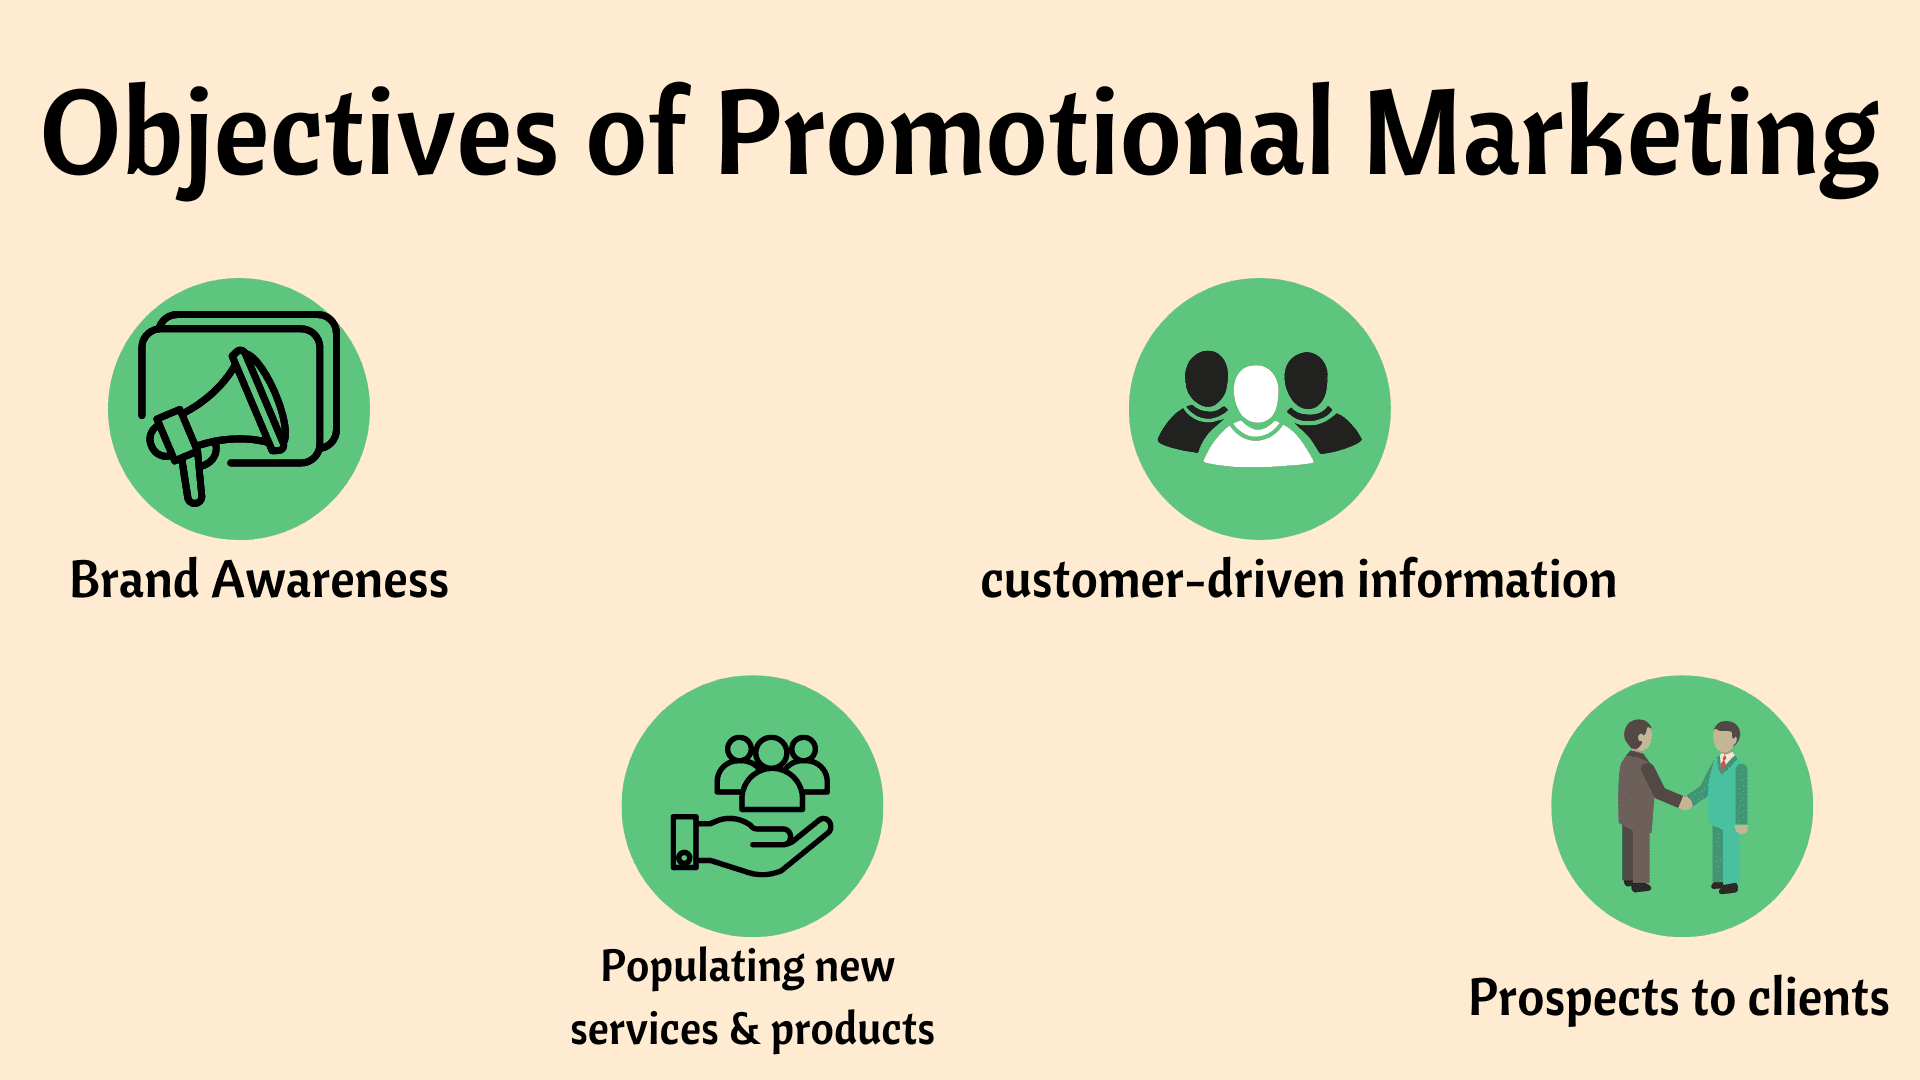 Objectives of promotional marketing